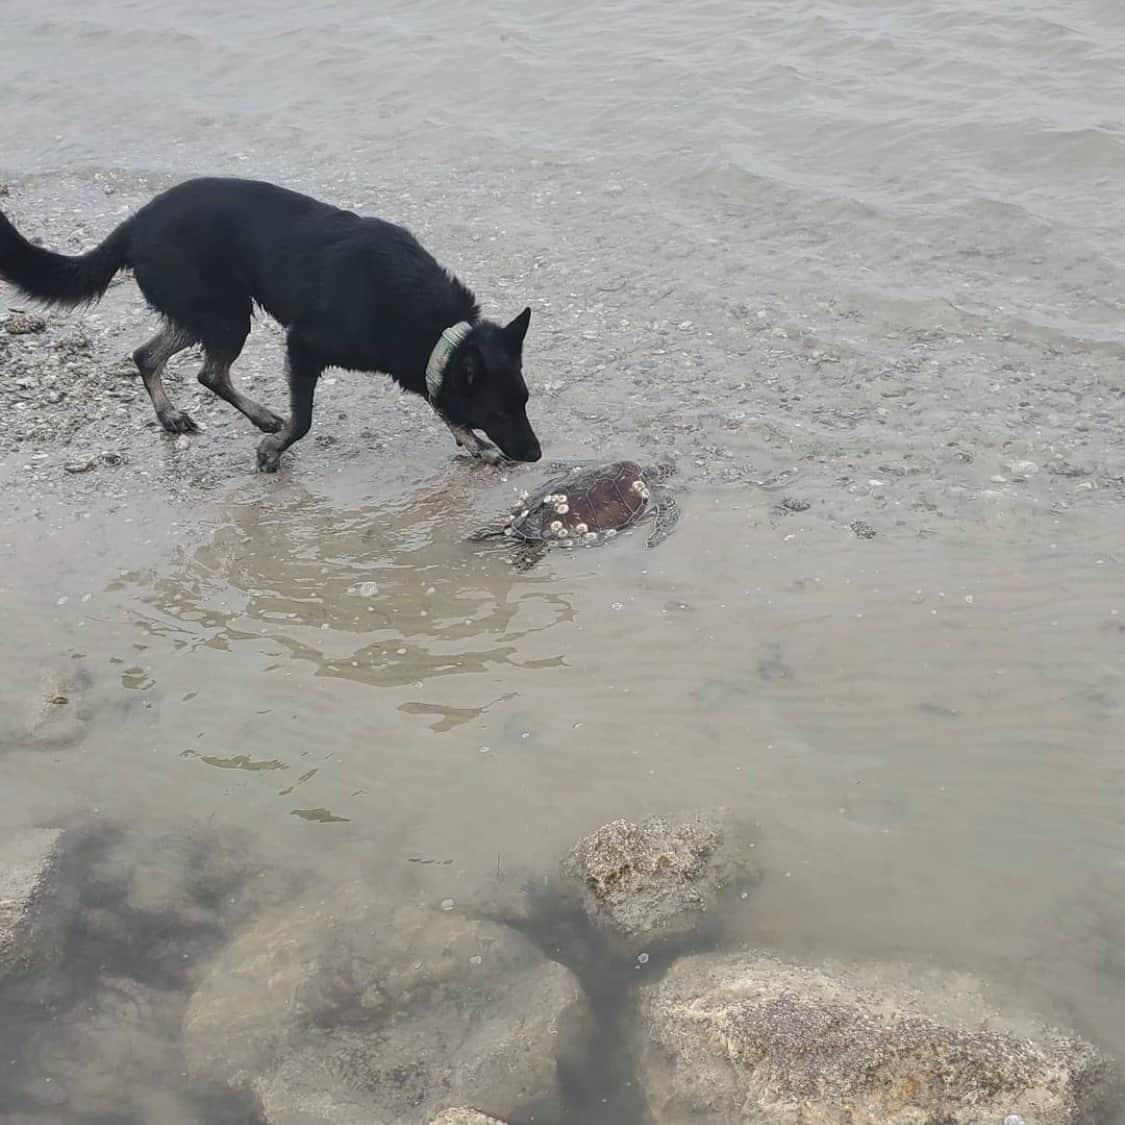 dog in water with turtle